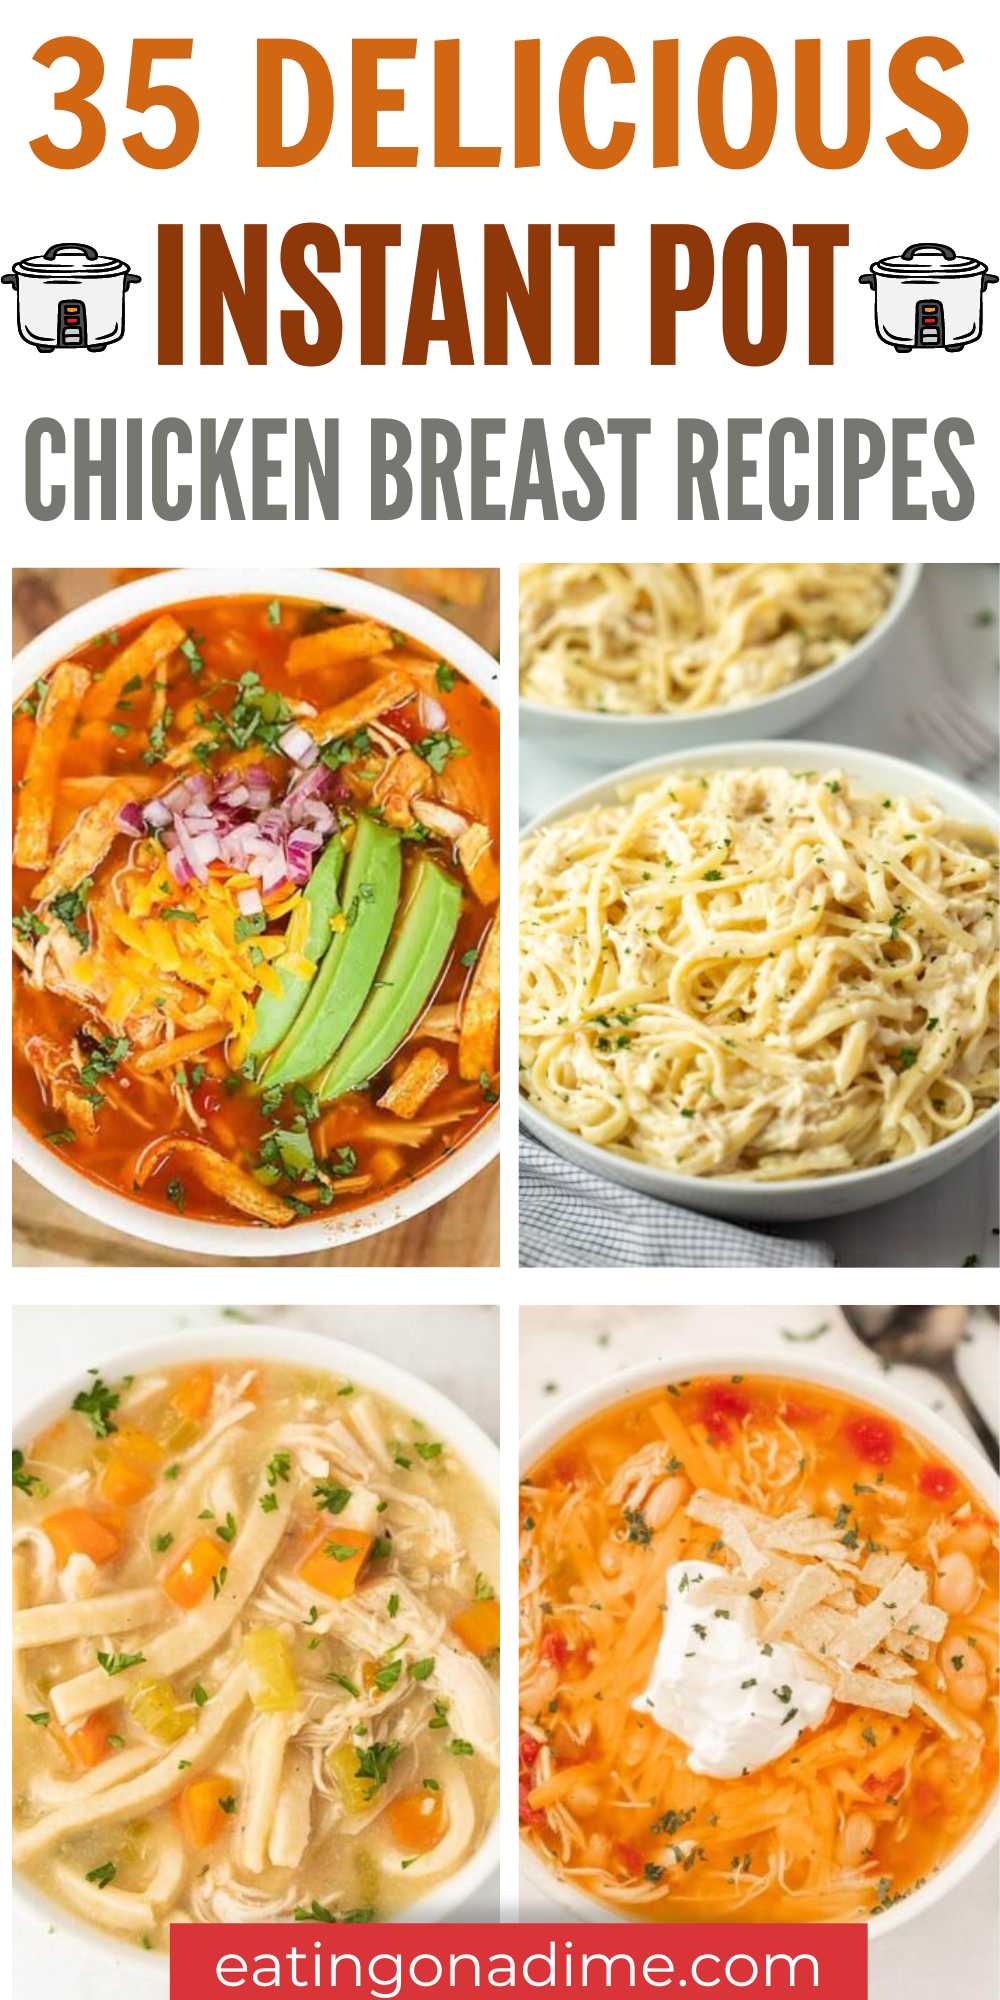 These 45 Instant Pot Chicken Recipes come together easily and you have a home cooked meal in minutes. Delicious and easy ingredients. The instant pot can cook a meal from frozen usually within about 10 to 20 minutes. Cooking chicken breast is the easiest and my favorite meat to cook in the instant pot. #eatingonadime #instantpotchickenbreastrecipes #chickenbreastrecipes #instantpot